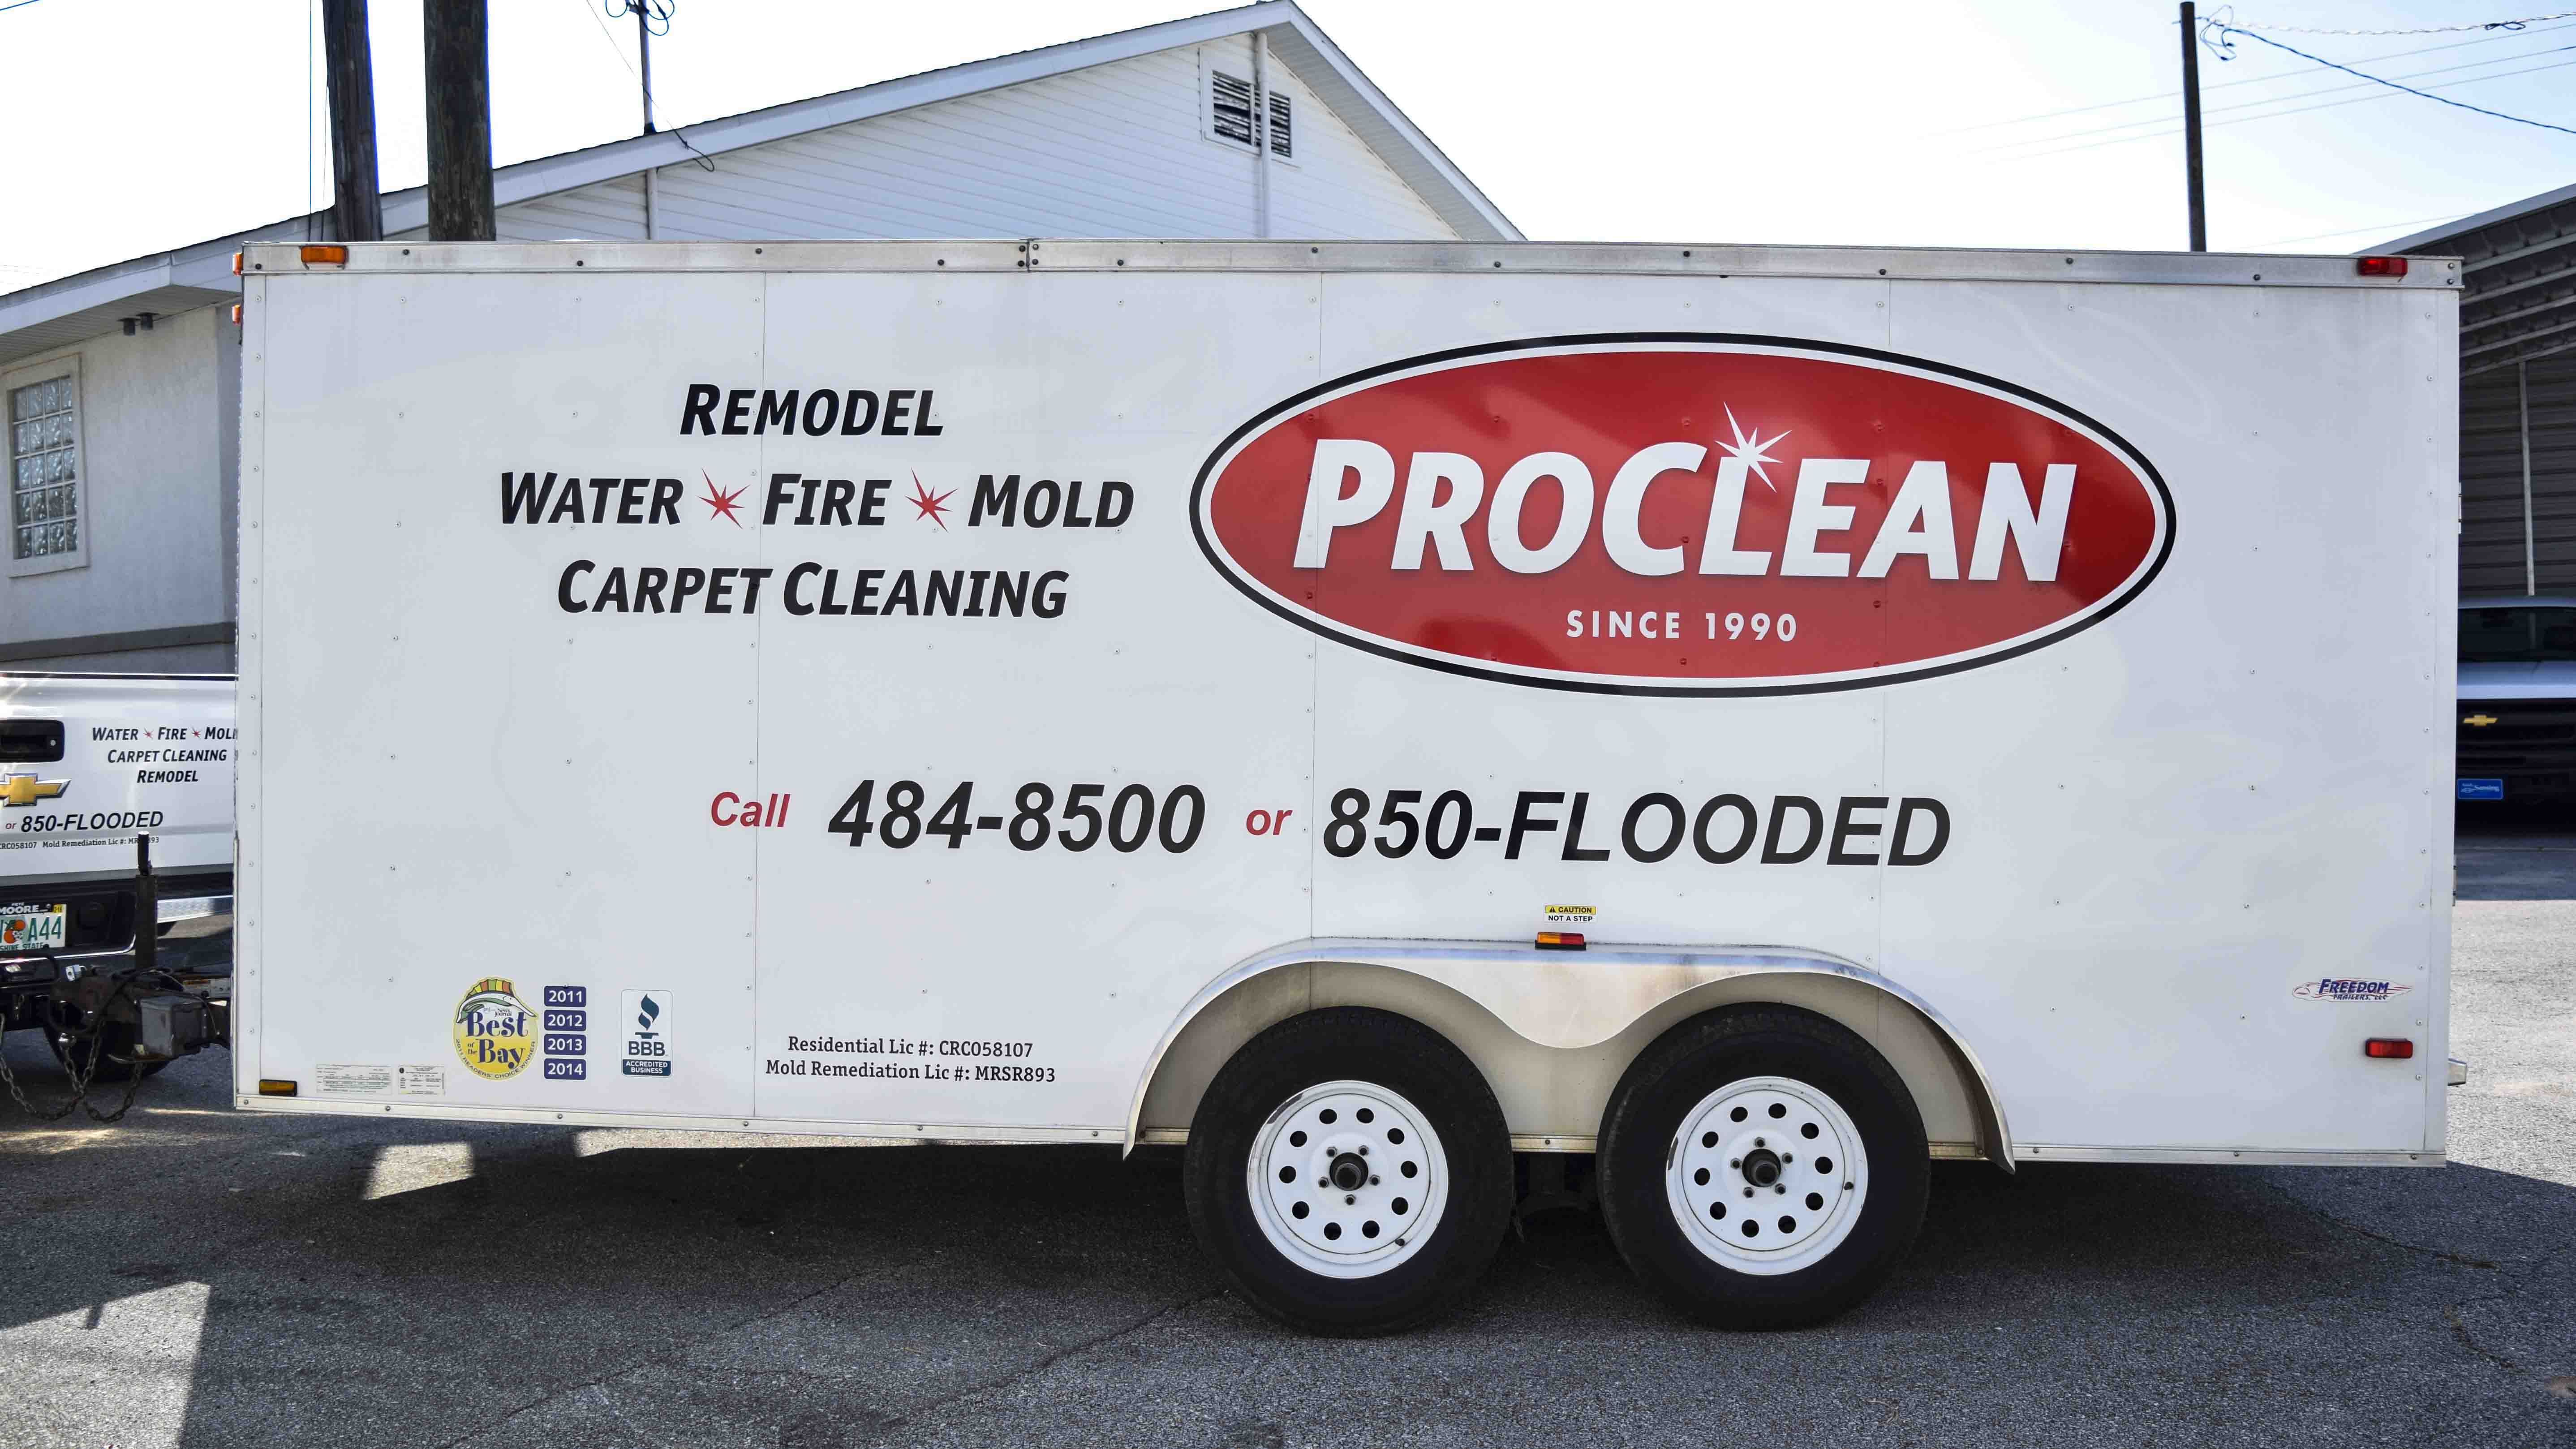 Pensacola Sign Vehicle Graphics - Graphics for ProClean trailer